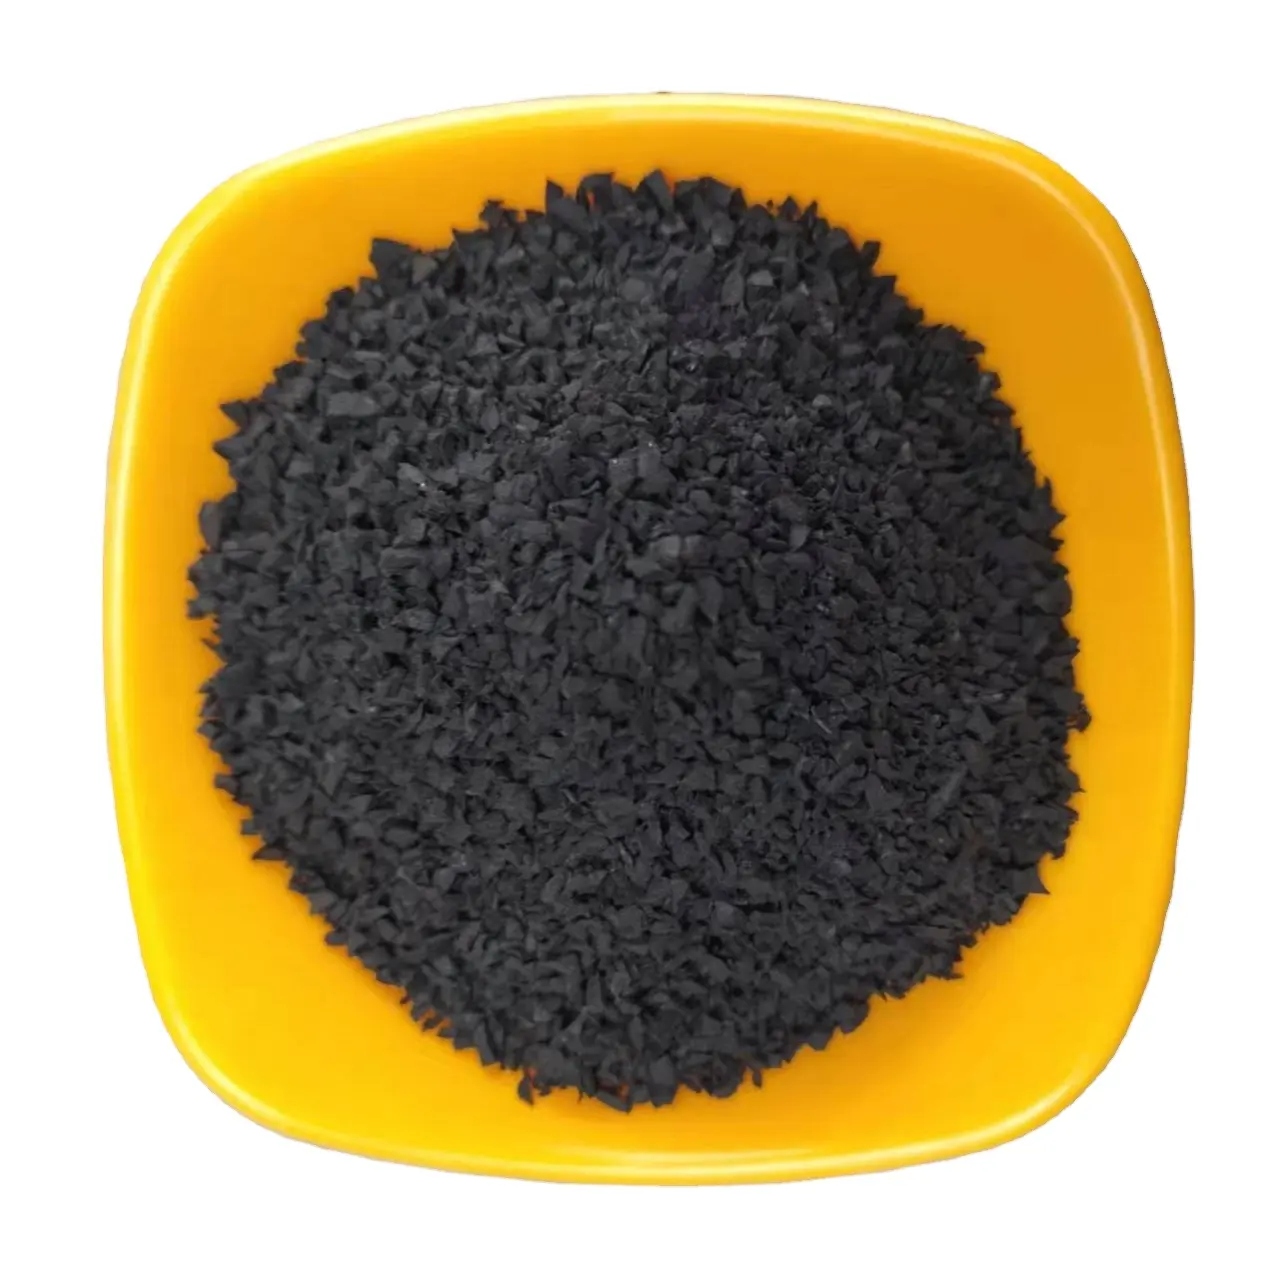 EPDM Color Rubber Granule Used for Playground Sports Runway running track material EDPM Rubber Granules FN-KT-19030123